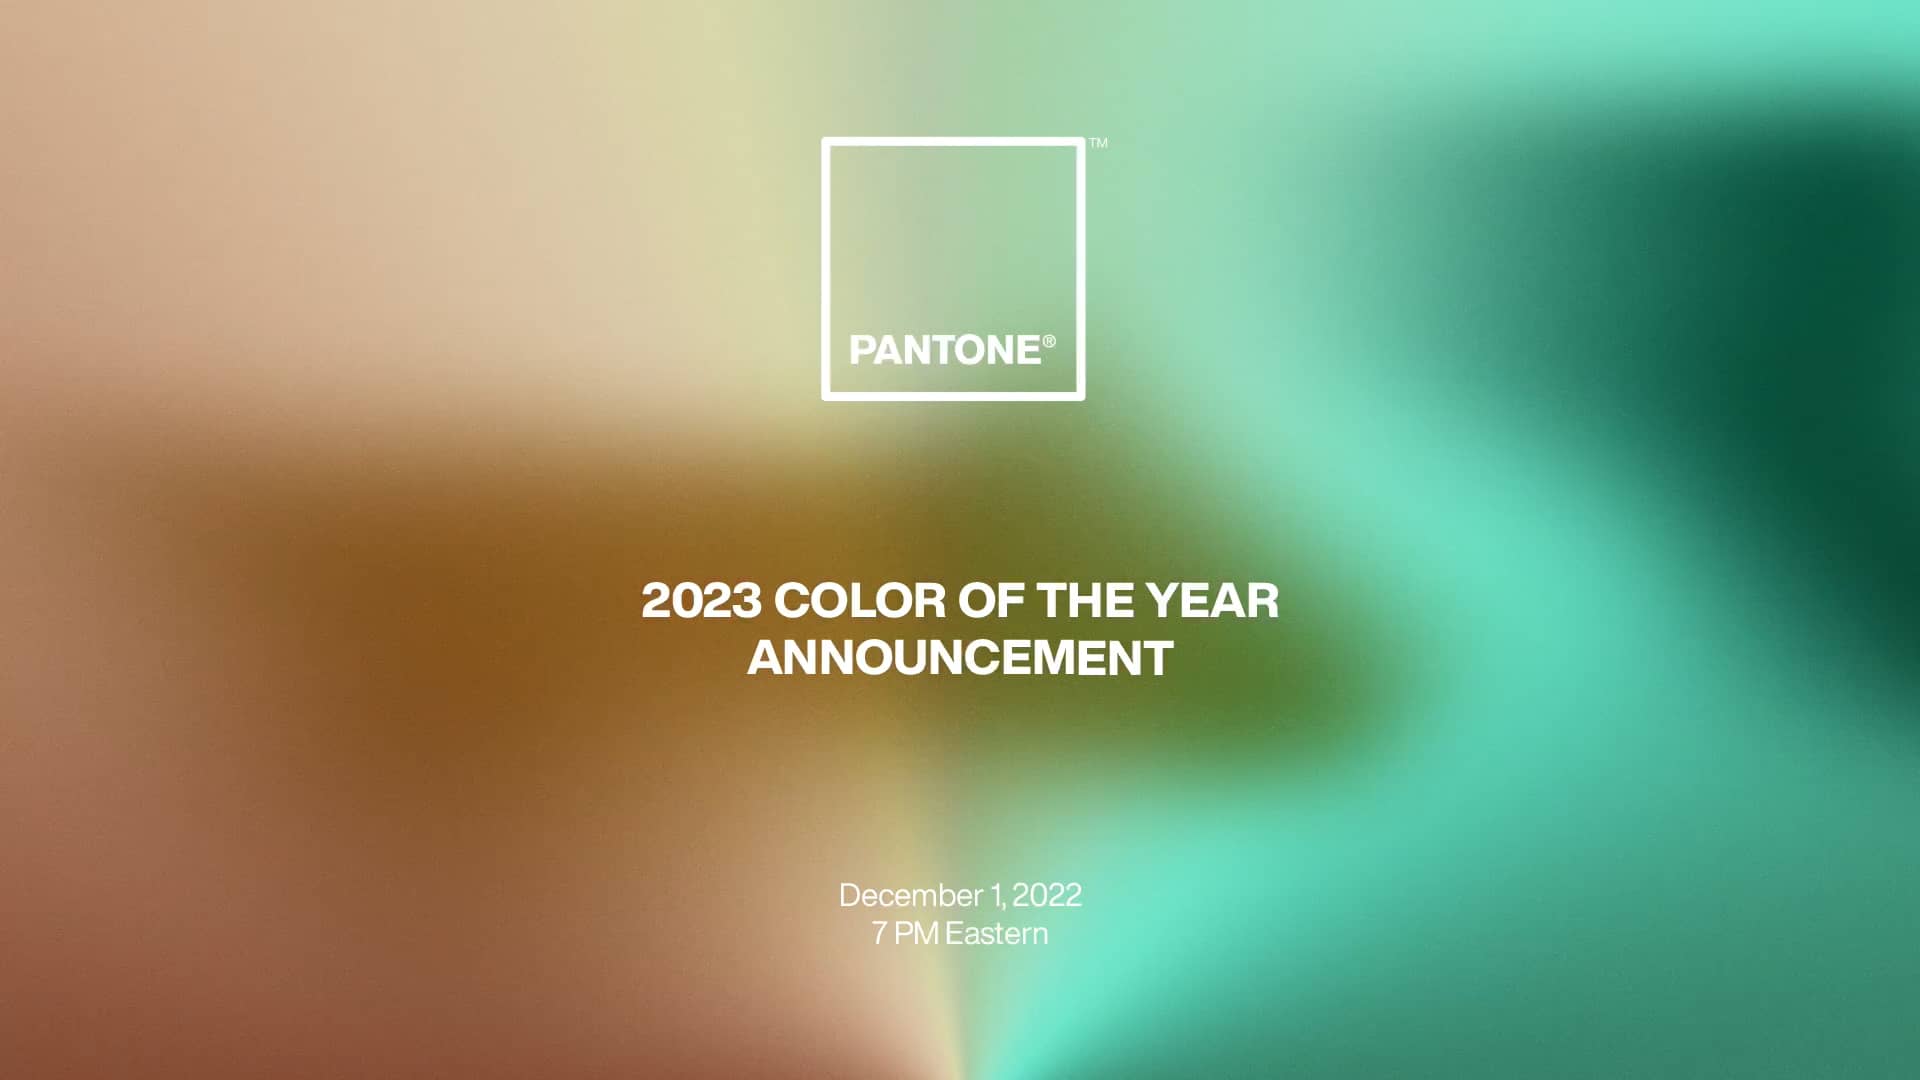 Pantone Color Of The Year 2023 Announcement on Vimeo